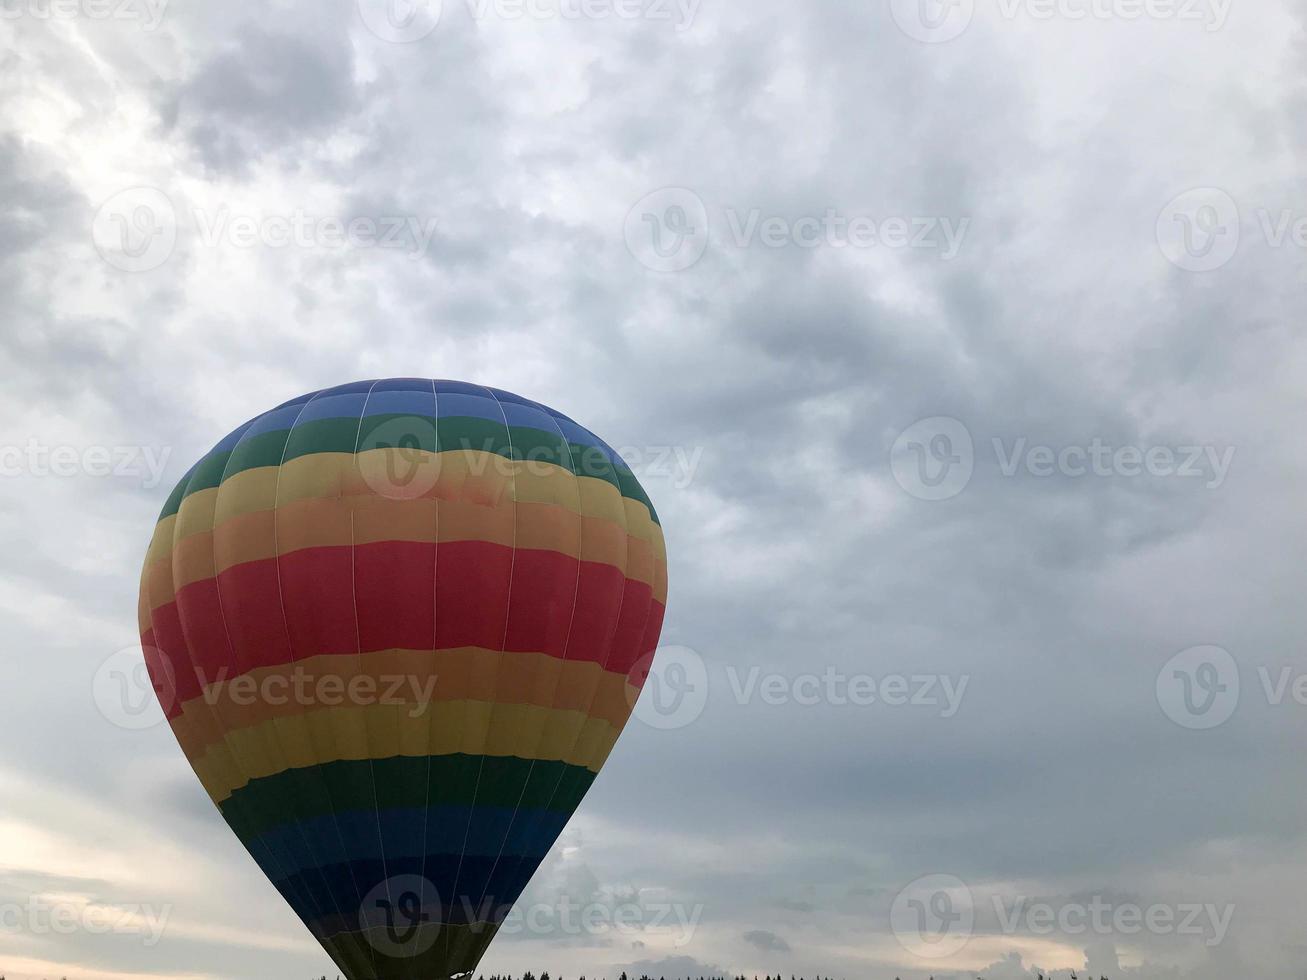 Large multi-colored bright round rainbow colored striped striped flying balloon with a basket against the sky in the evening photo